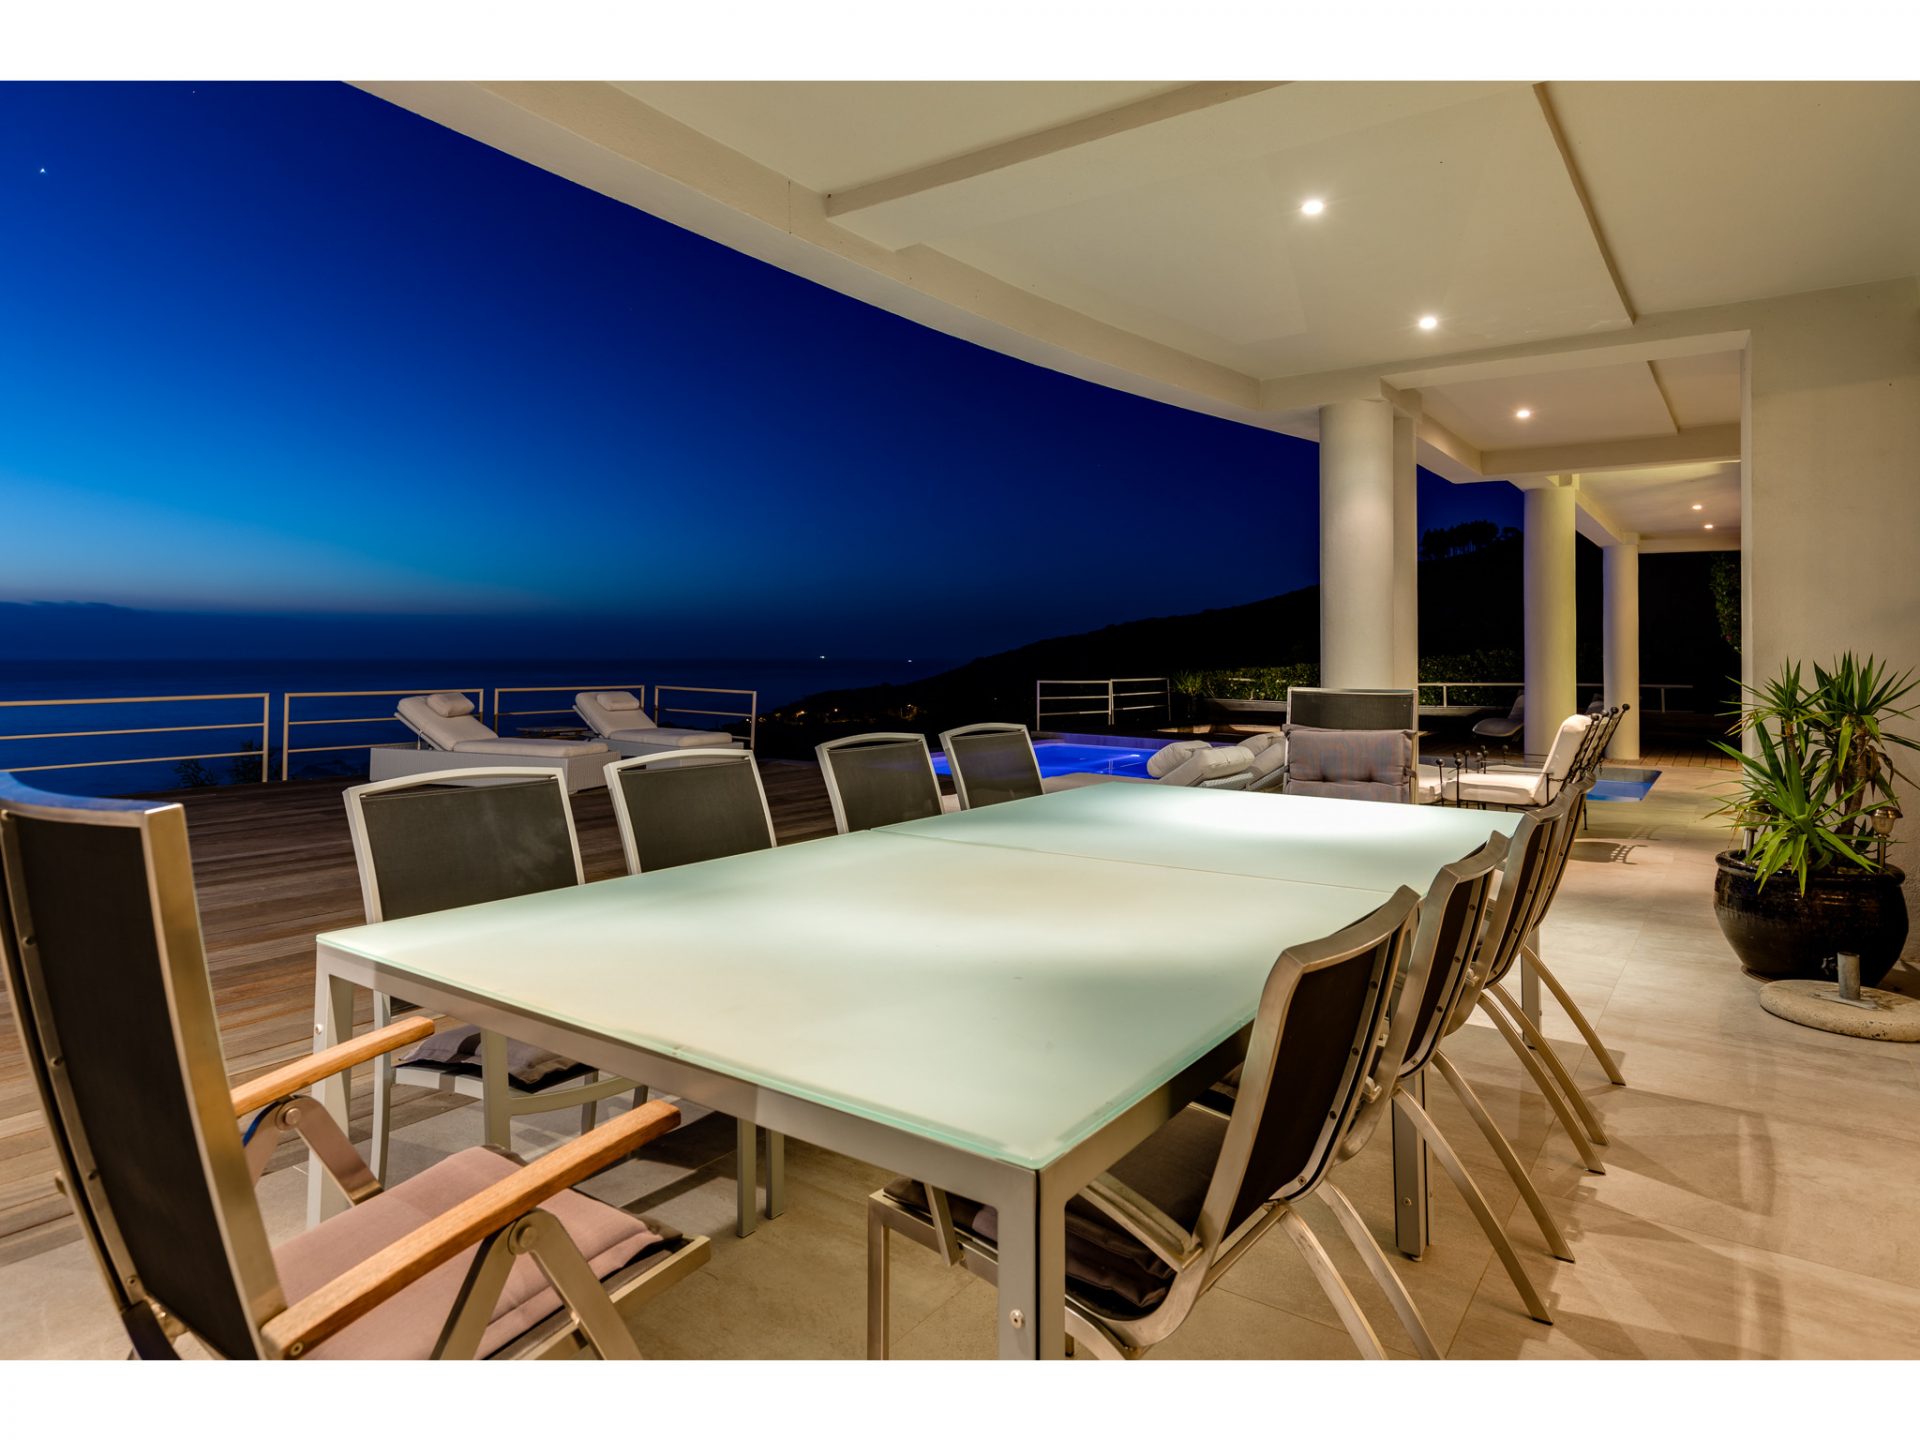 Photo 23 of Geneva Sunsets accommodation in Camps Bay, Cape Town with 6 bedrooms and 7 bathrooms